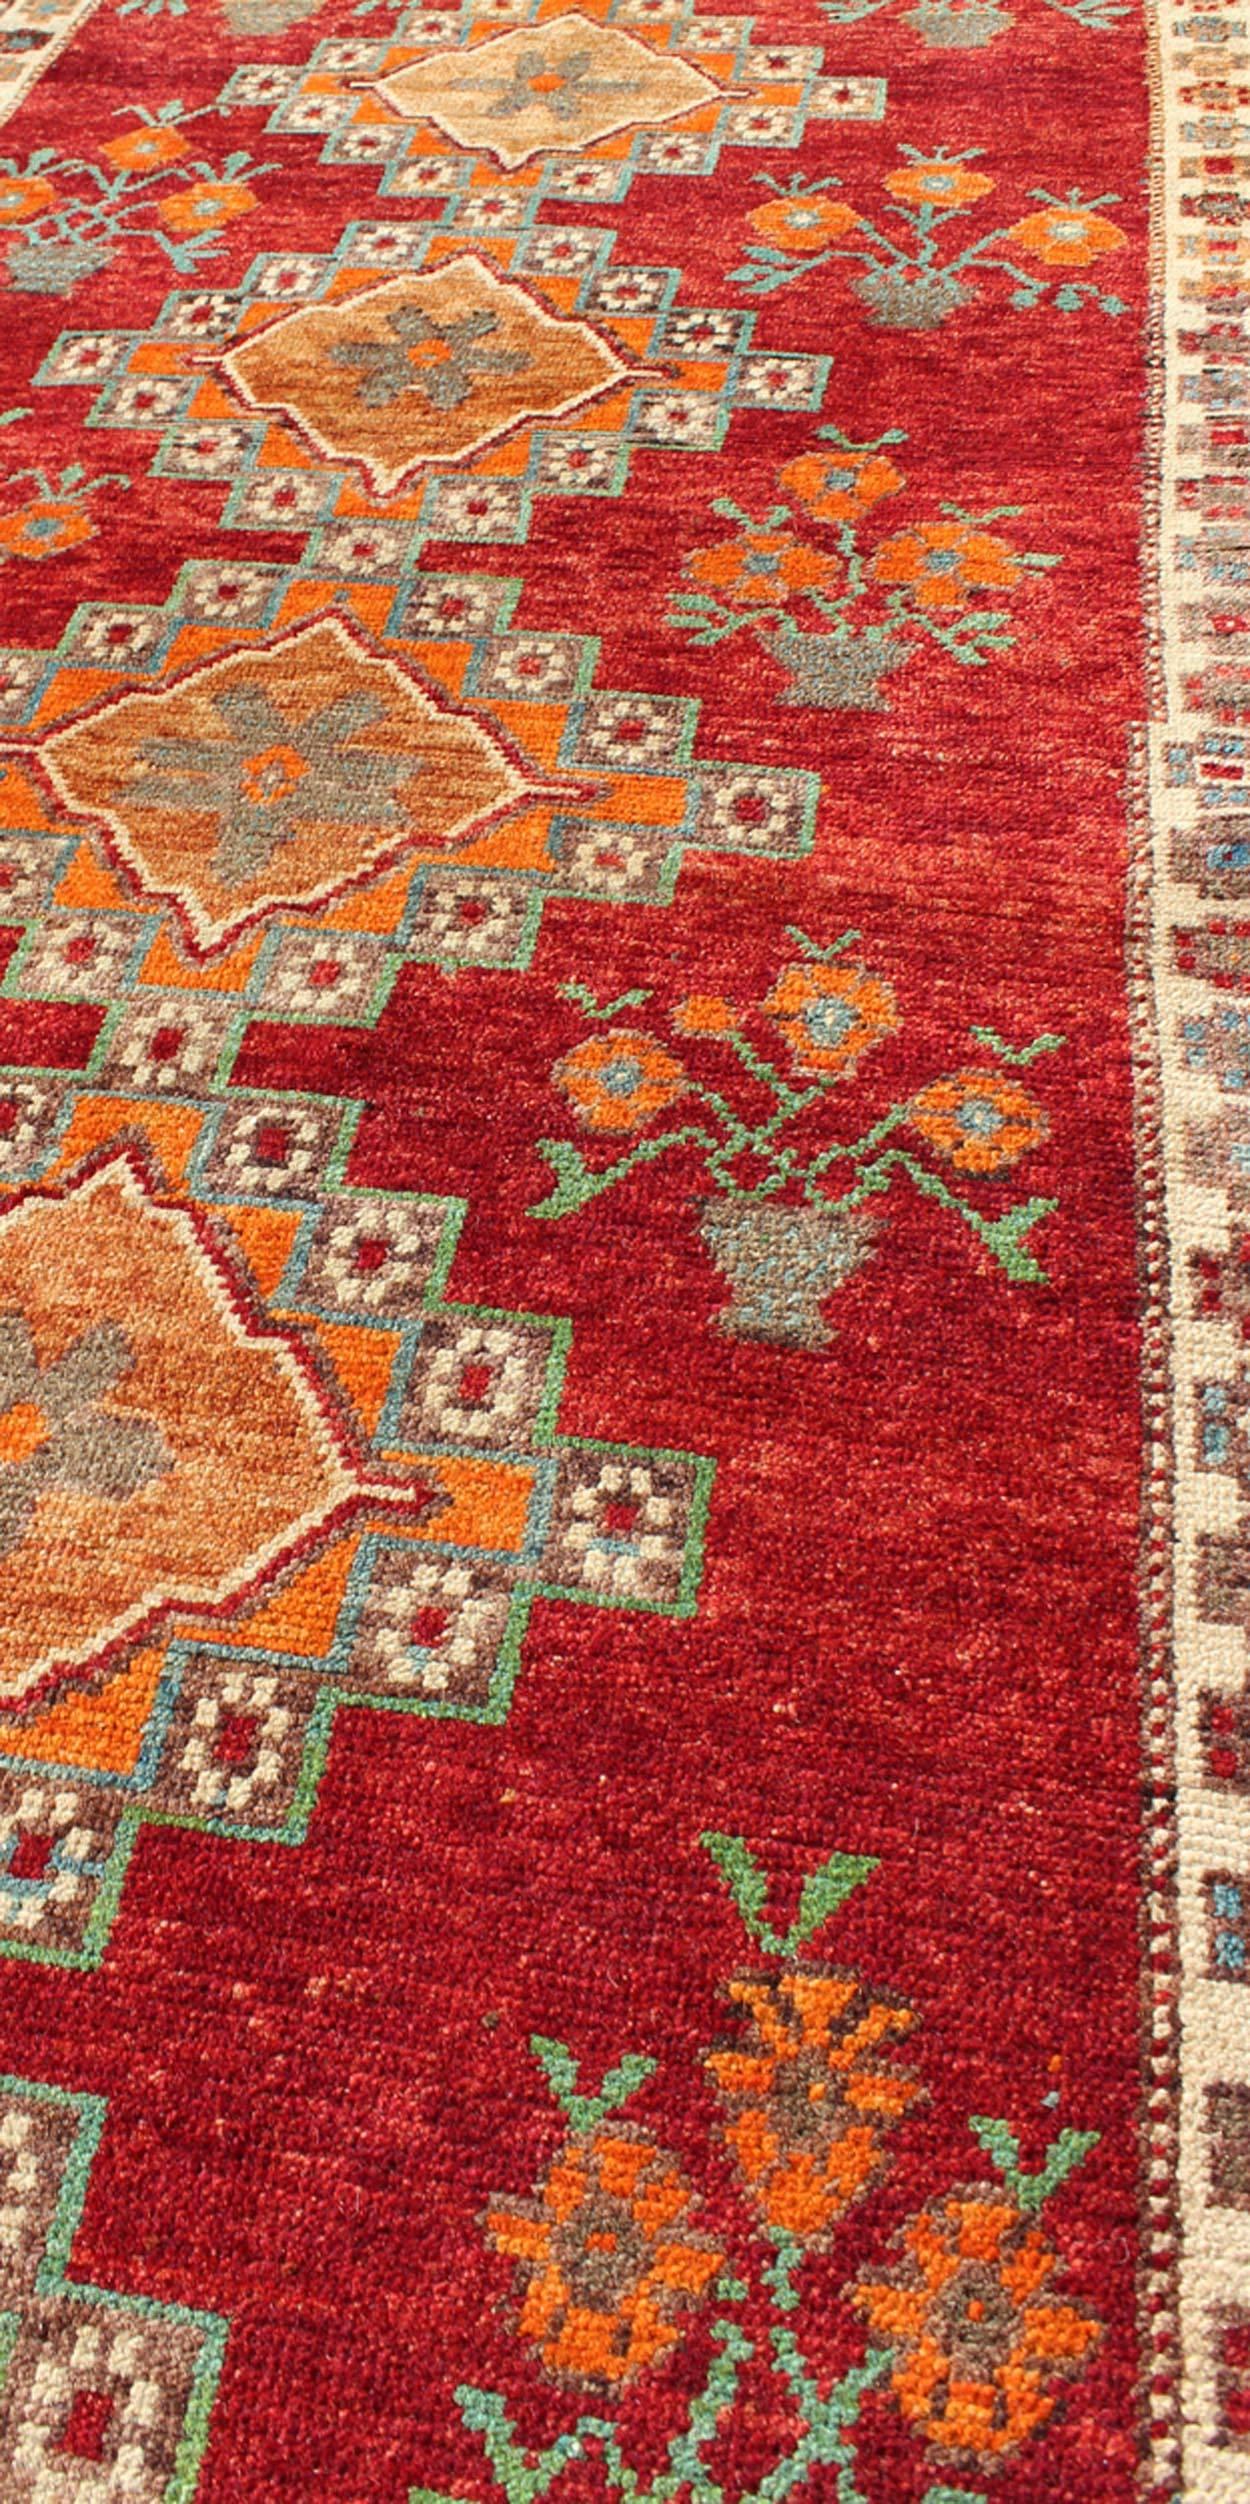 Vintage Turkish Oushak Runner in Beautiful Royal Red, Light Blue/Gray and Orange In Good Condition For Sale In Atlanta, GA